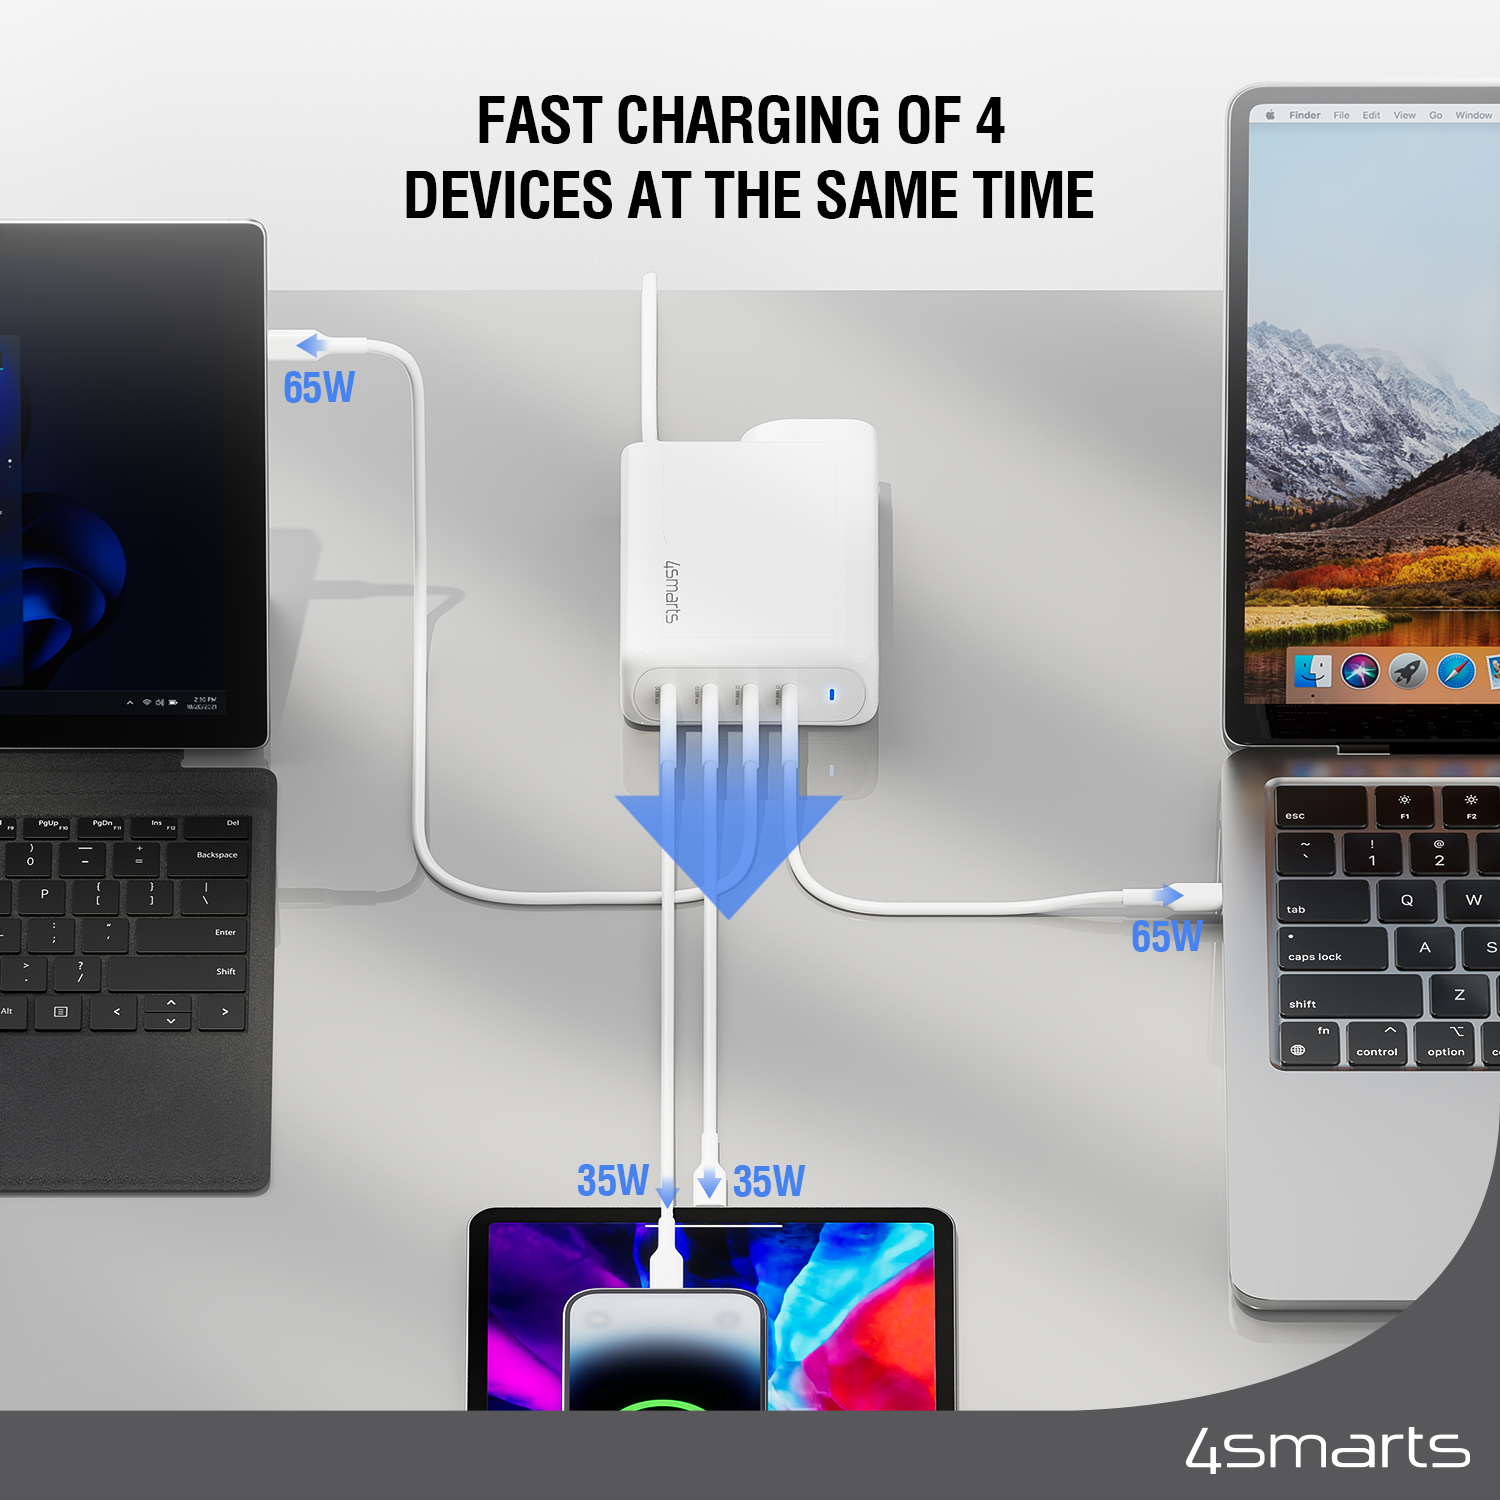 The 4smarts USB C 200W GaN Charger can charge up to 4 devices simultaneously.